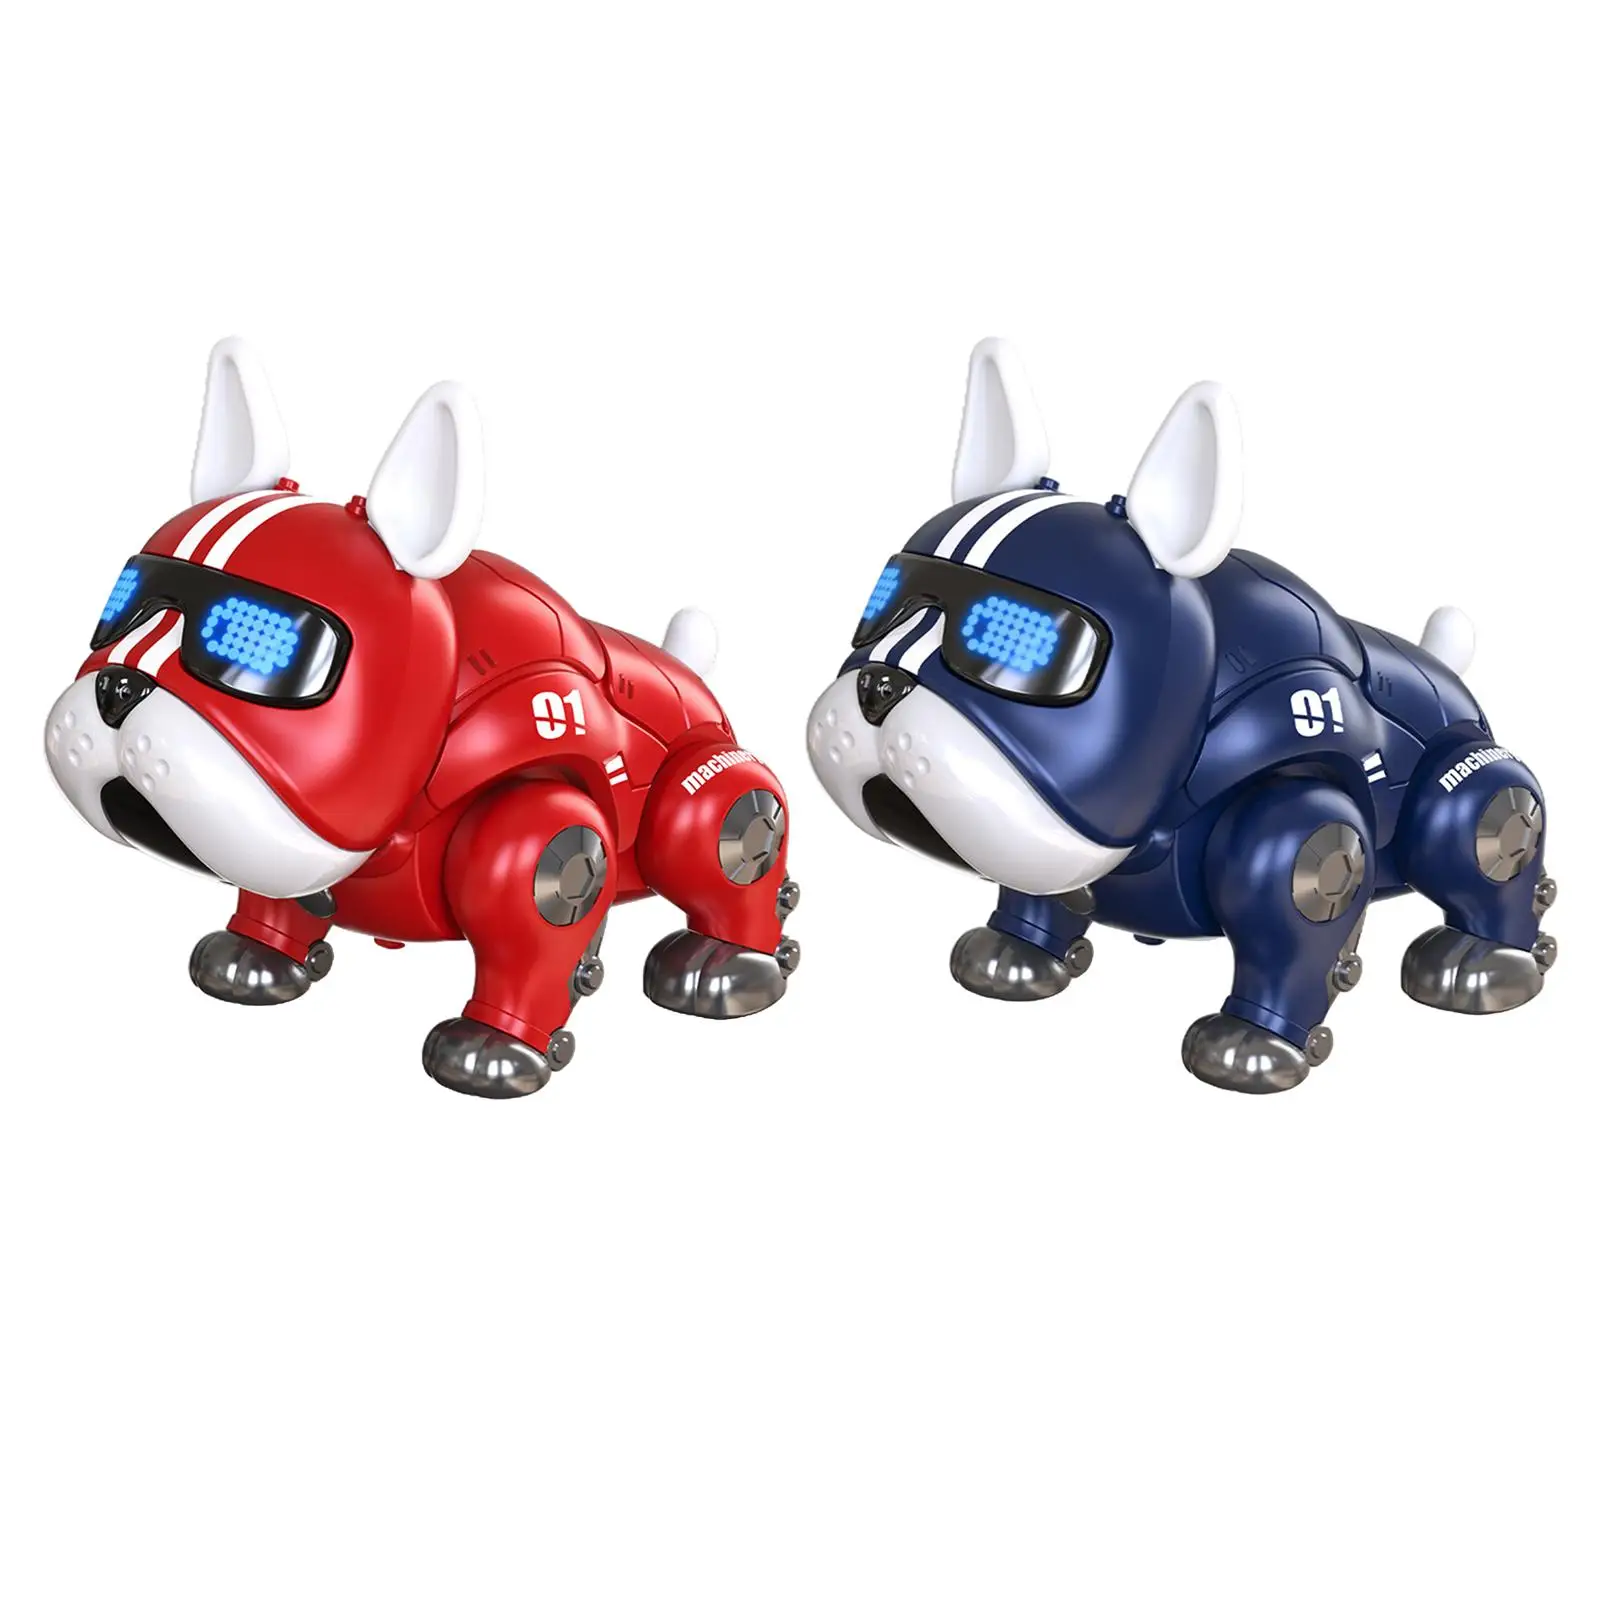 Walking Dancing Robot Dog Toys Crawling Music Toys with Light Musical Toys Dance Music Puppy Robot for Children Kids